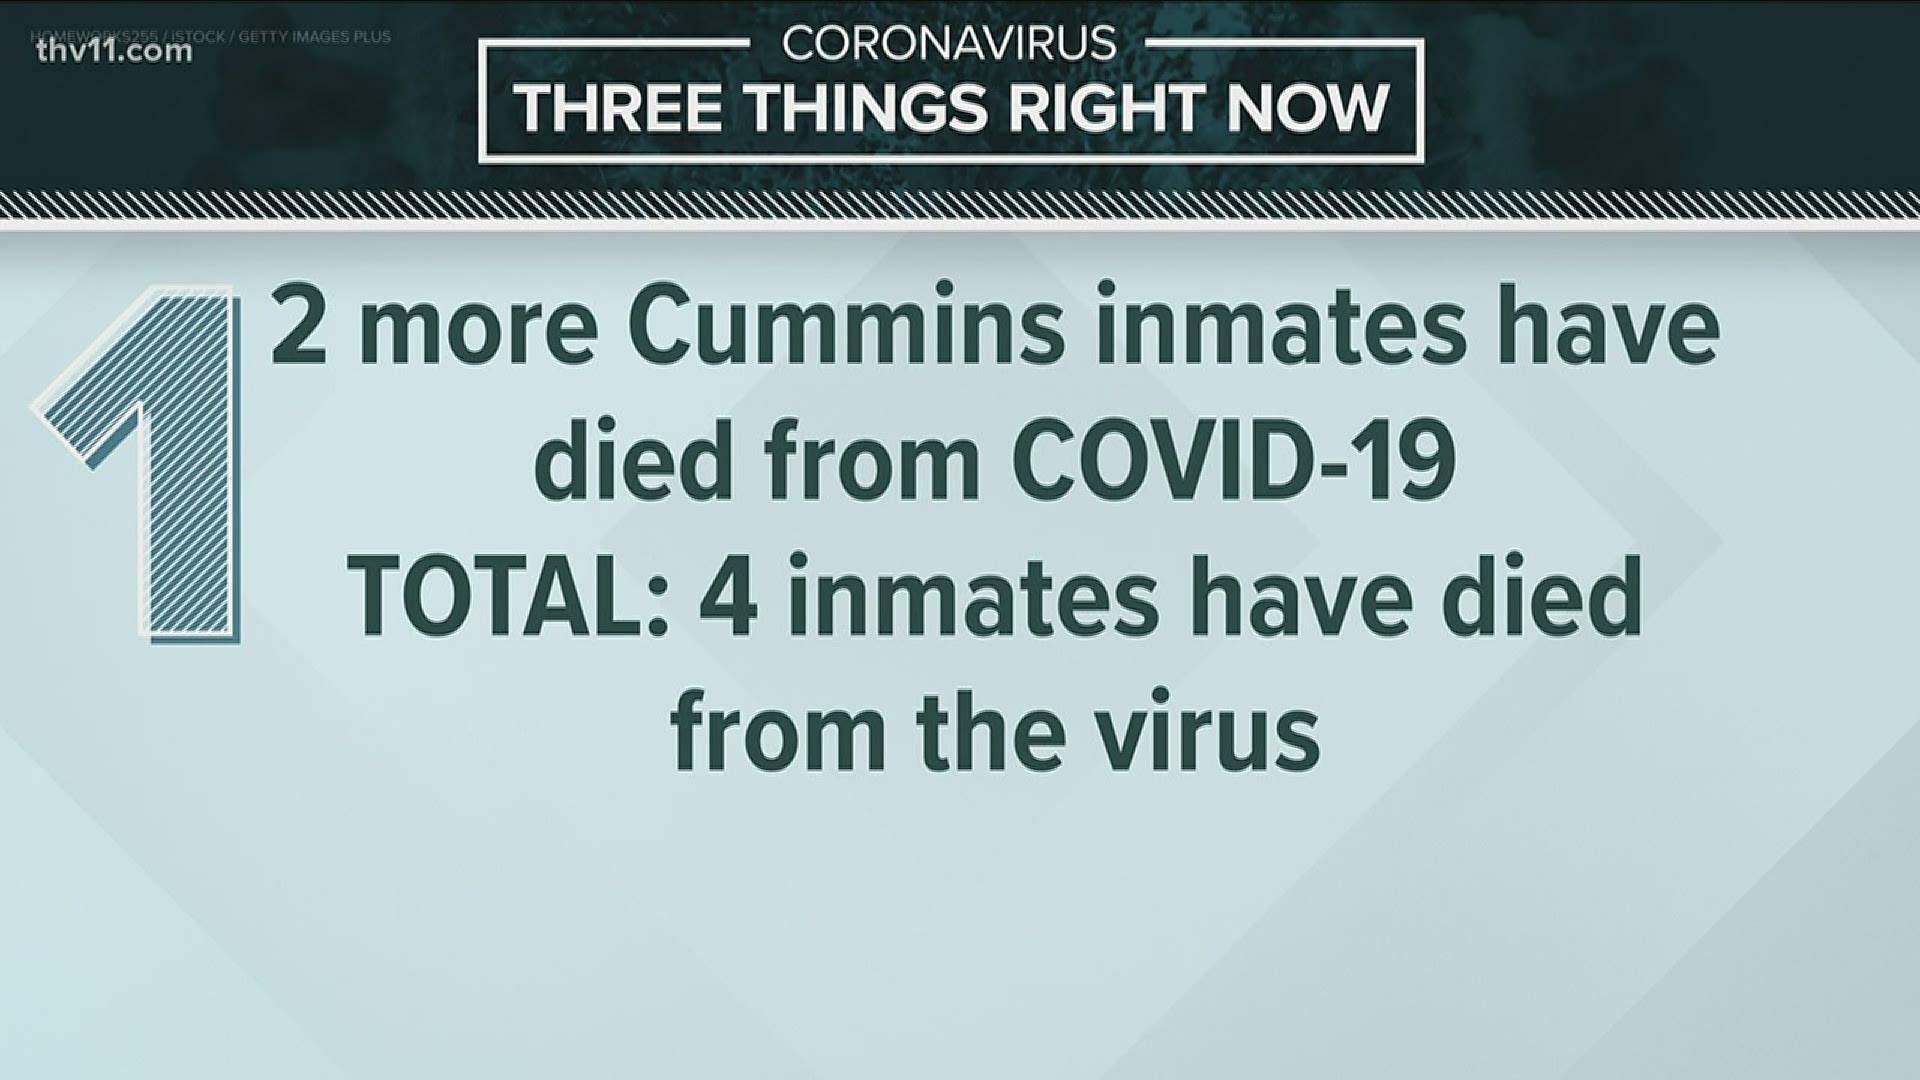 Two inmates died at separate hospitals today while being treated for COVID-19. One other inmate at Cummins collapsed and died, but the cause is not confirmed.